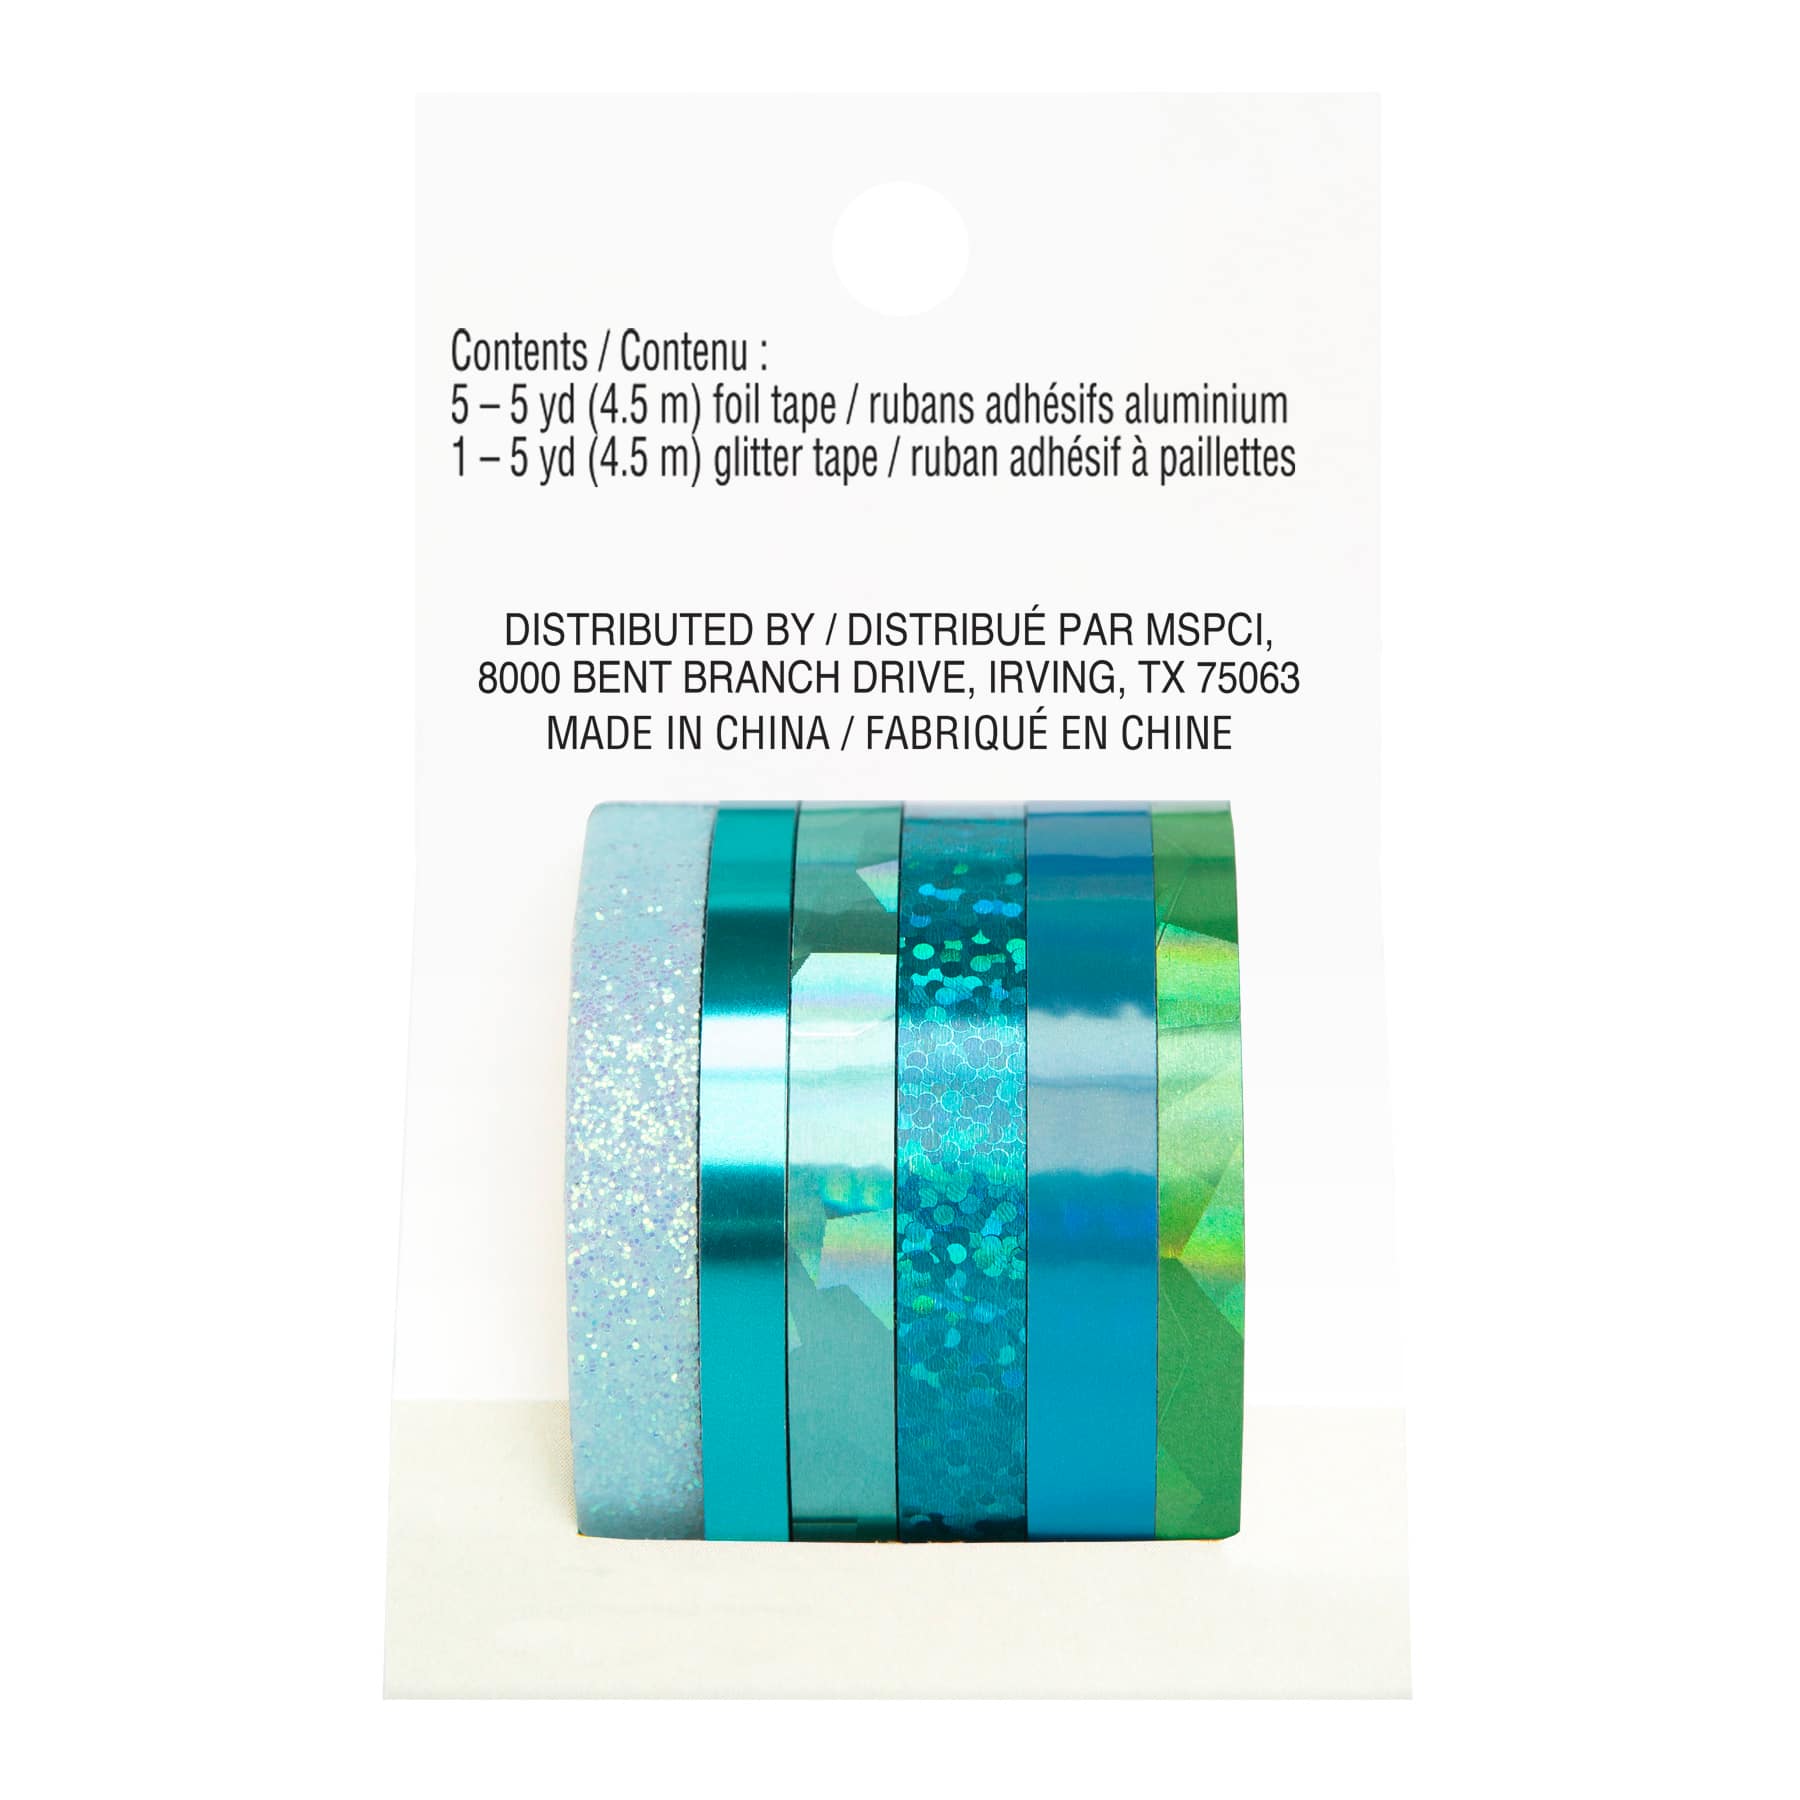 Seafoam Foil &#x26; Glitter Crafting Tape Set by Recollections&#x2122;